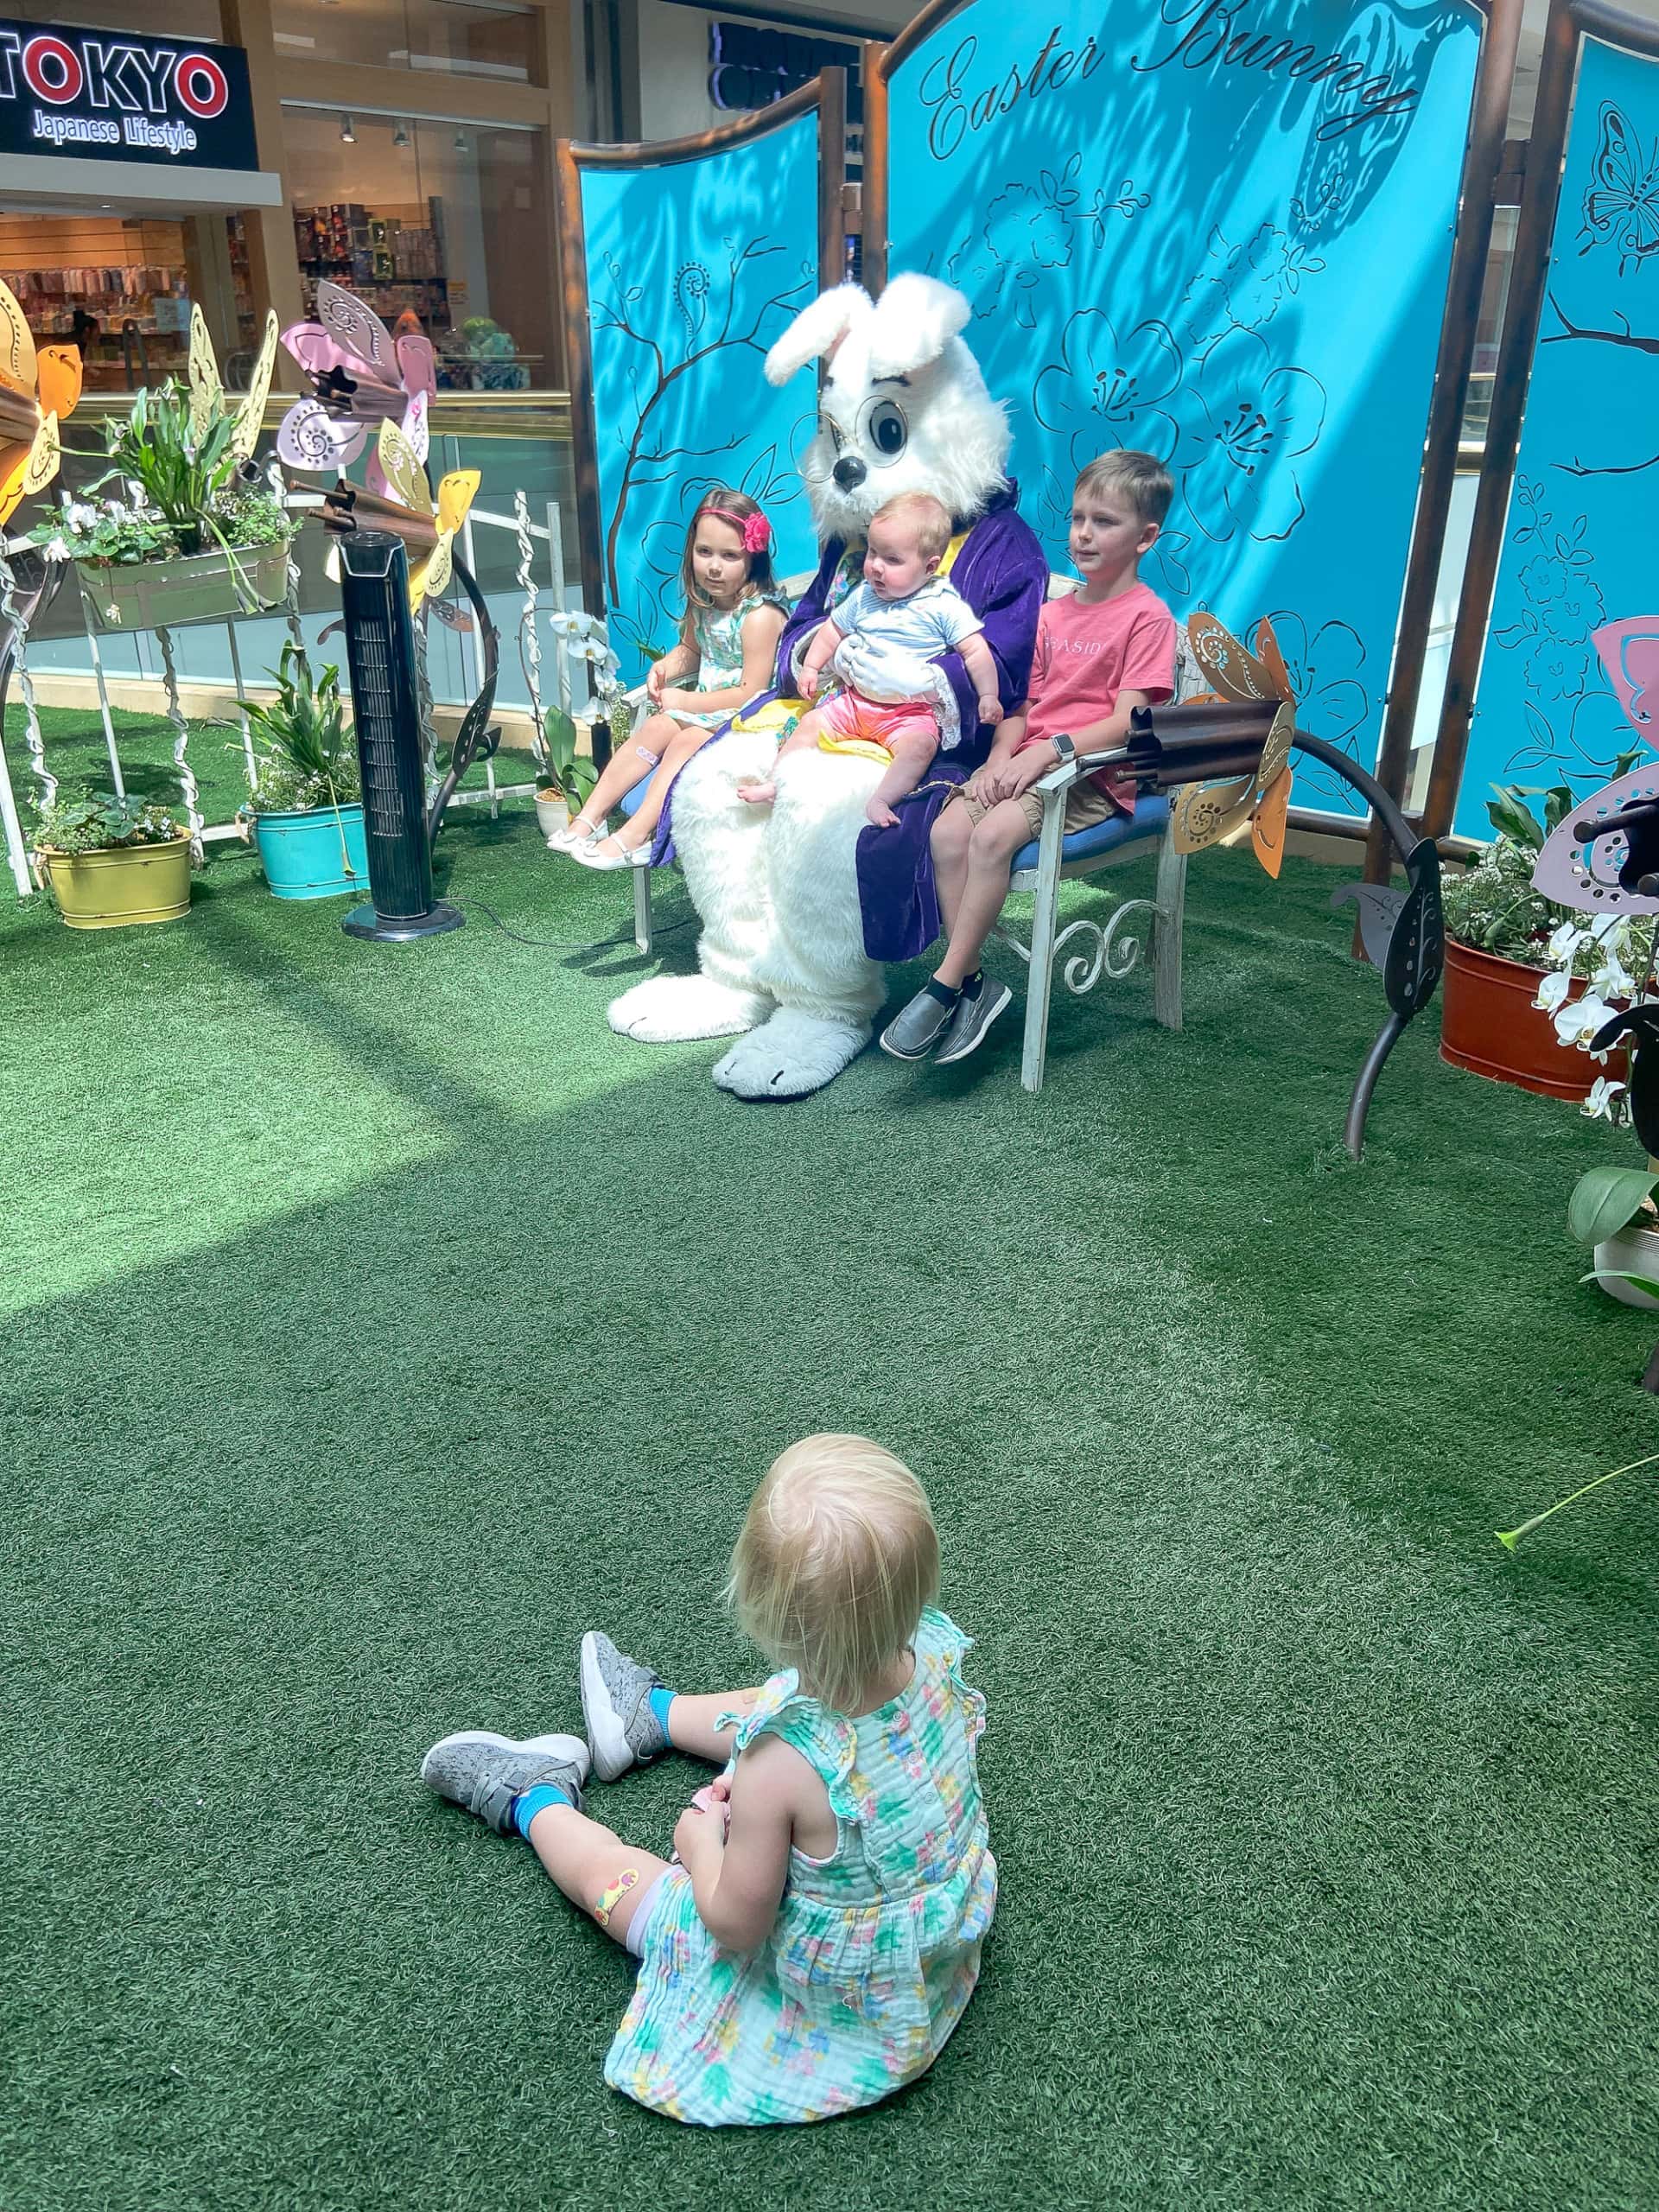 Rory refusing to sit on the Easter bunny's lap